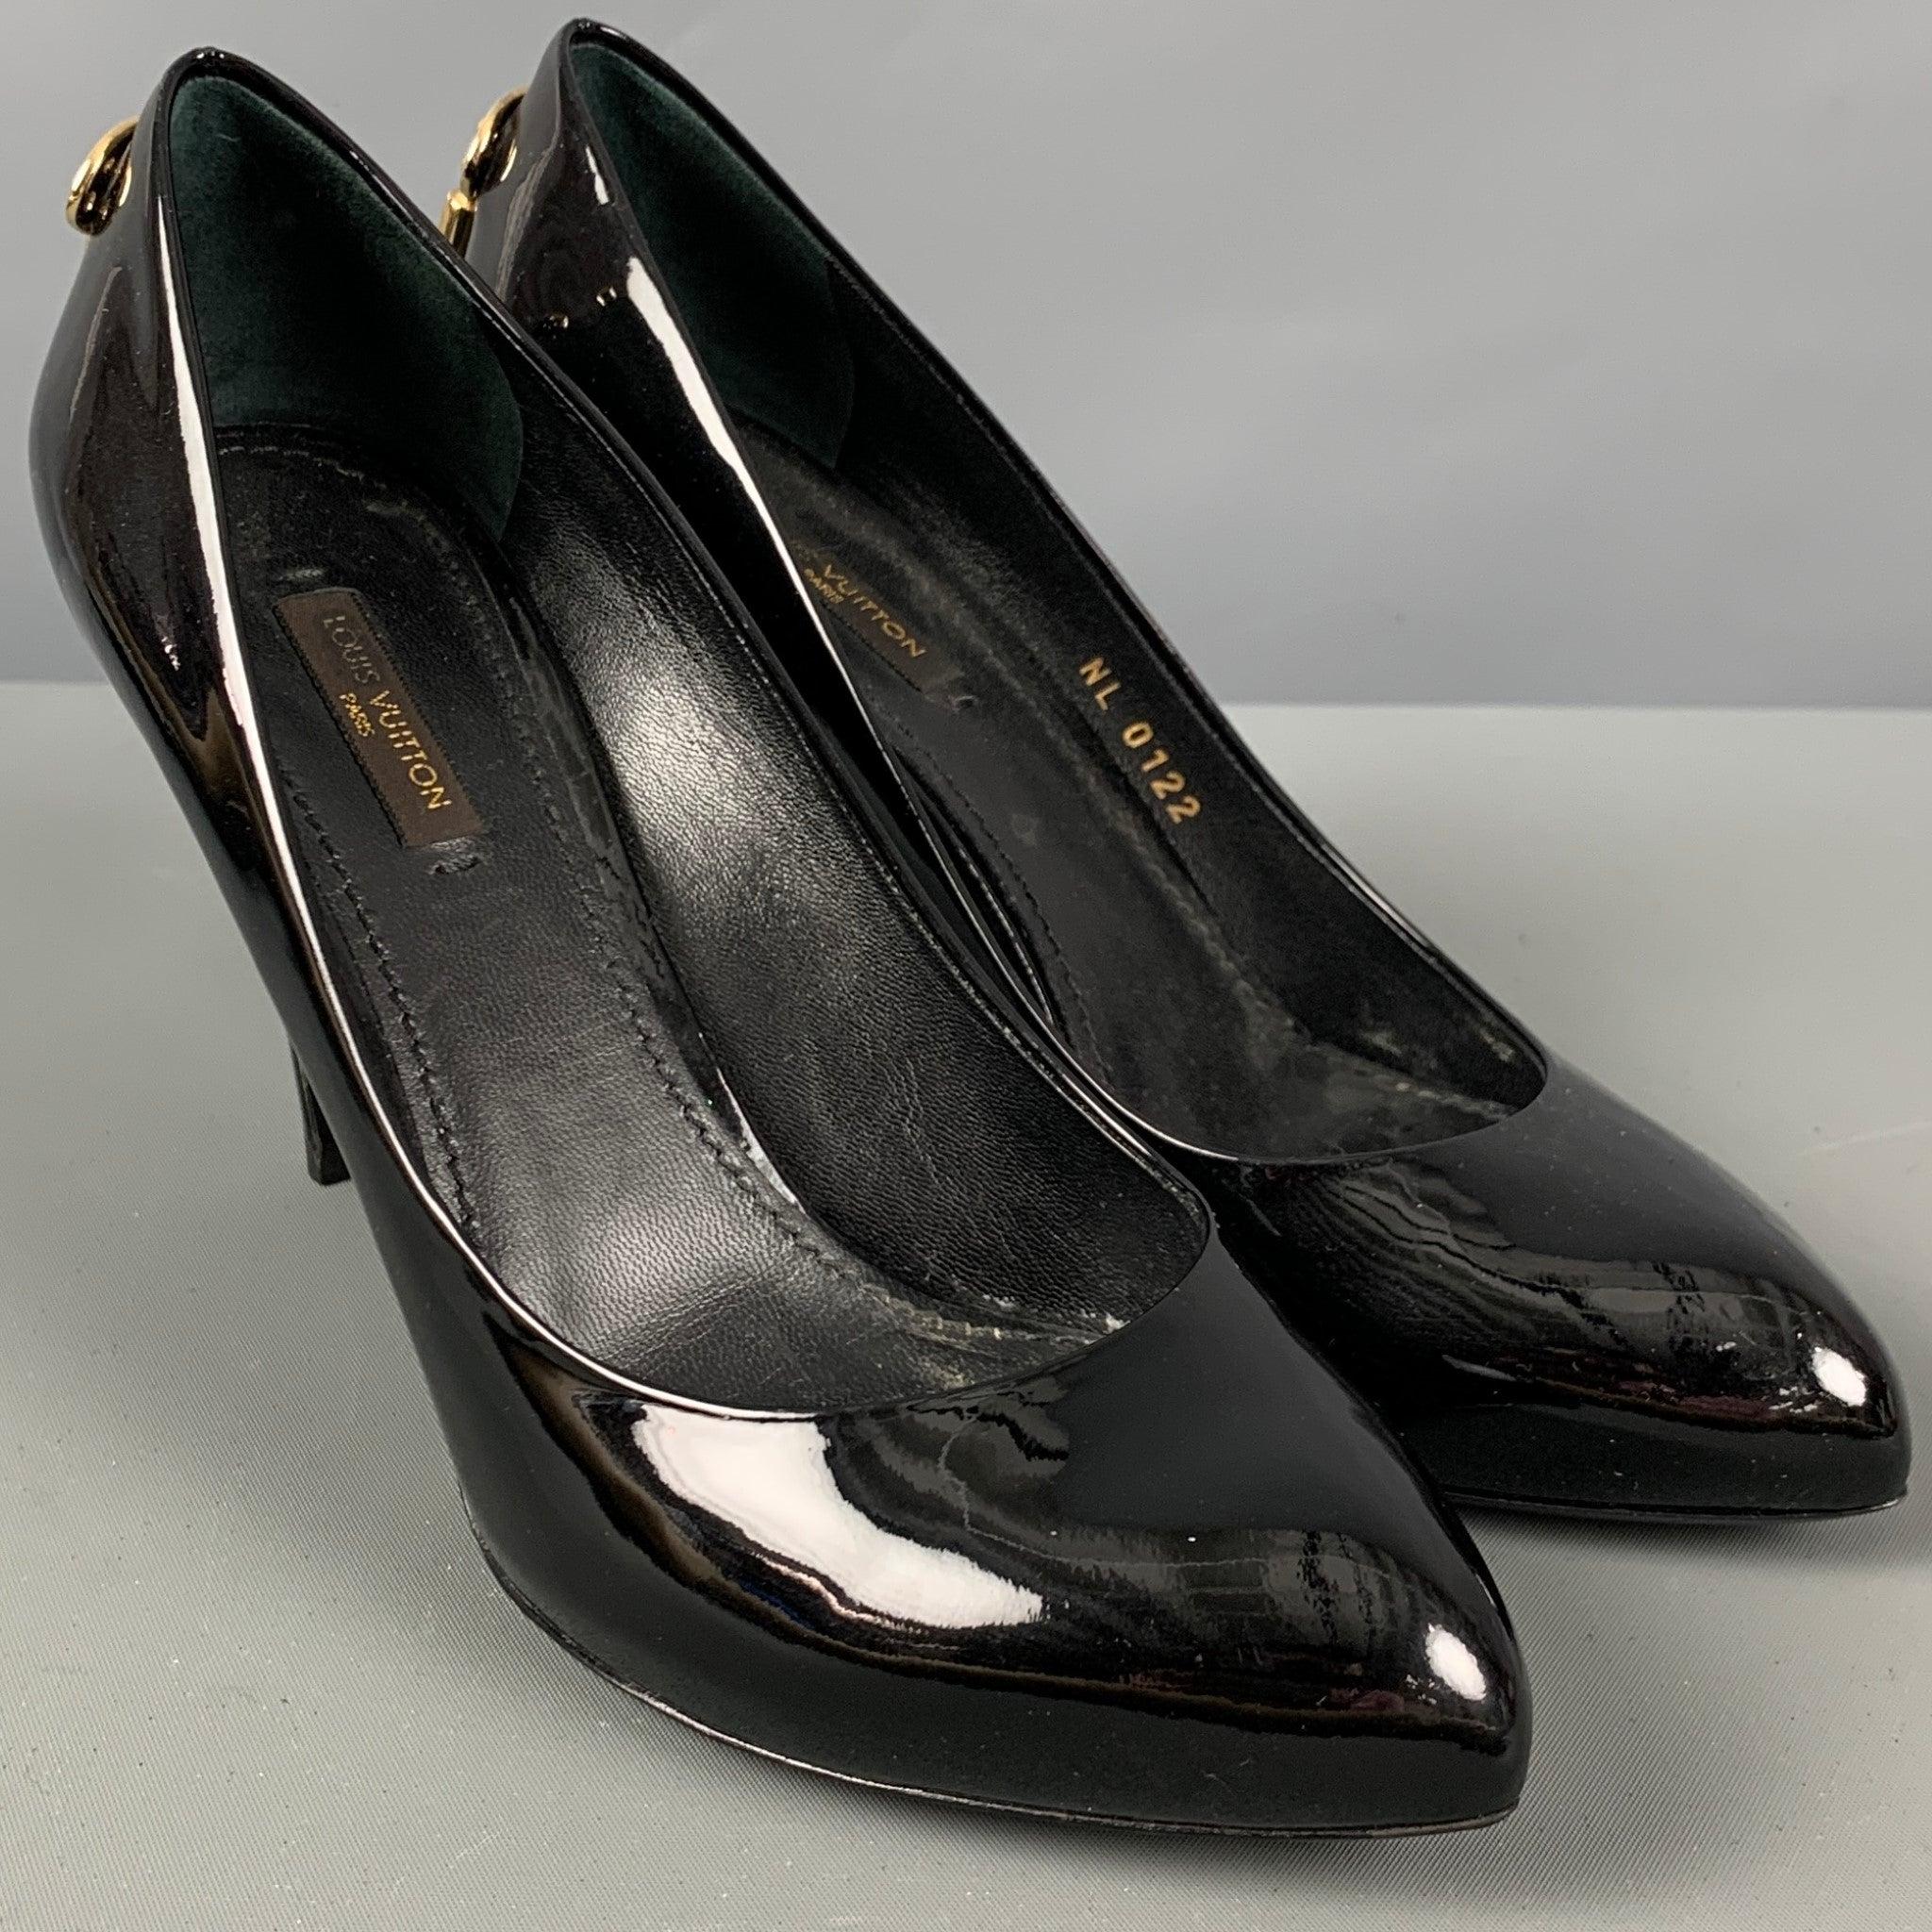 LOUIS VUITTON pumps in a black patent leather featuring a gold tone heel lock design, and a pointed toe. Made in Italy.Very Good Pre-Owned Condition. 

Marked:   NL 0122 

Measurements: 
  Length: 8.5 inches Width: 3 inches Height: 6 inches 
  
  
